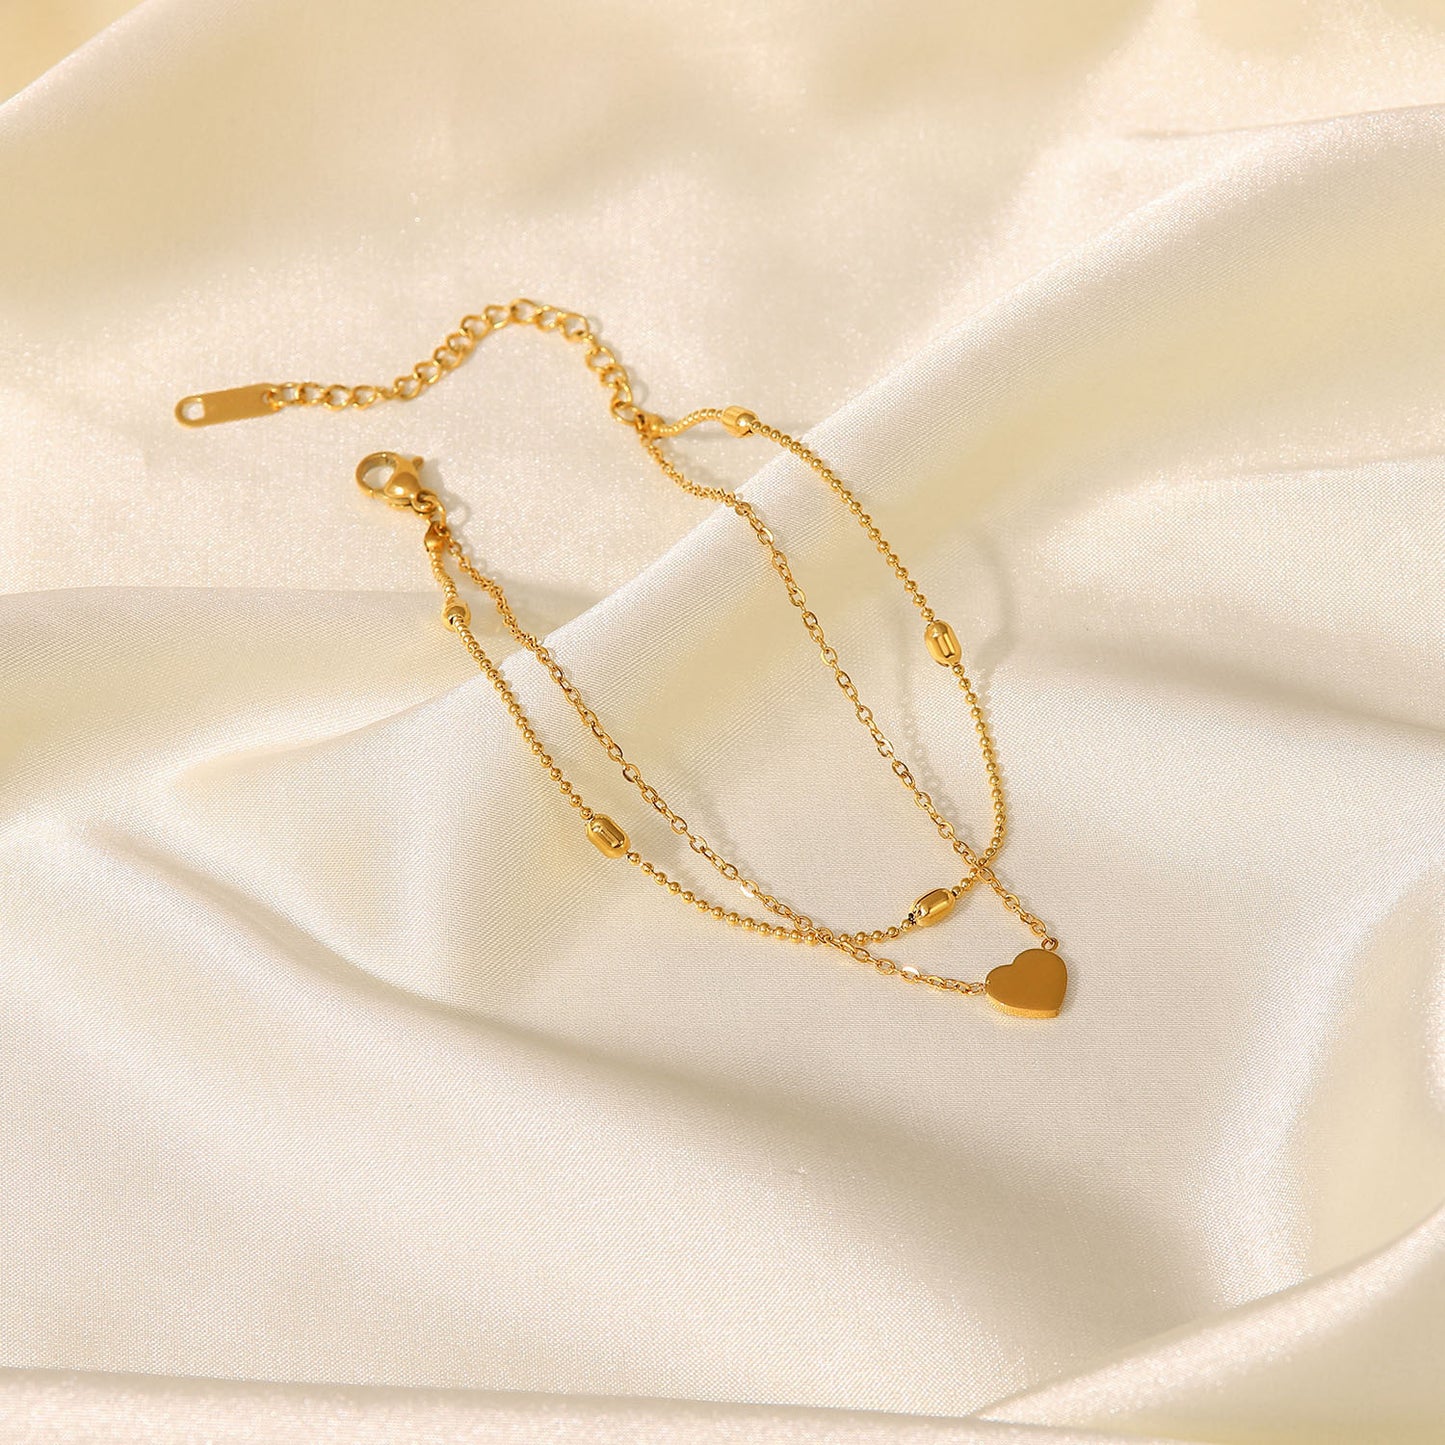 18K Gold Fashionable Exquisite Heart Pendant with Oval Bead Chain Double Layer Versatile Anklet